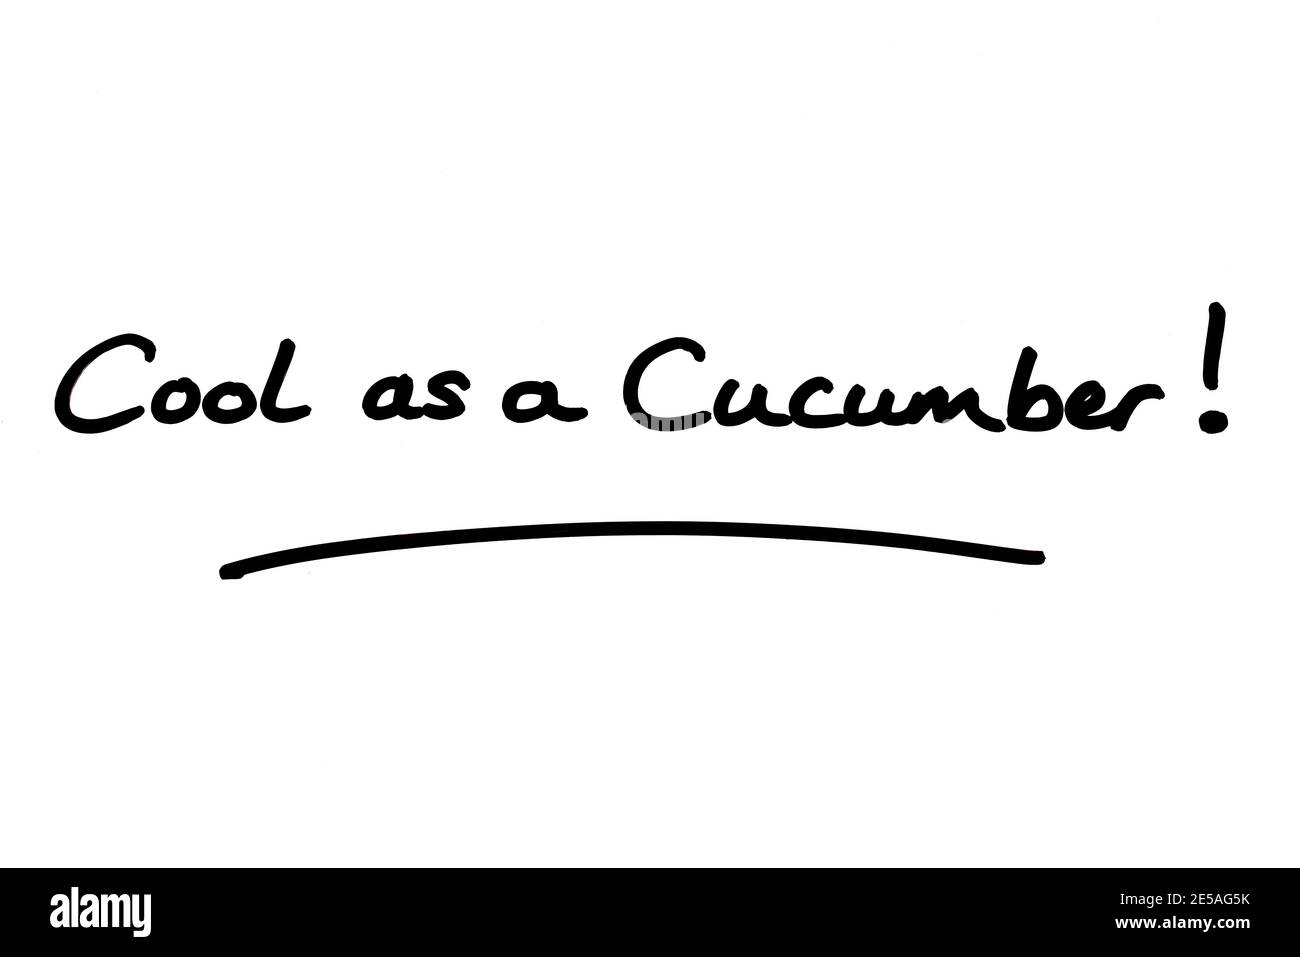 Cool as a Cumcumber! handwritten on a white background. Stock Photo